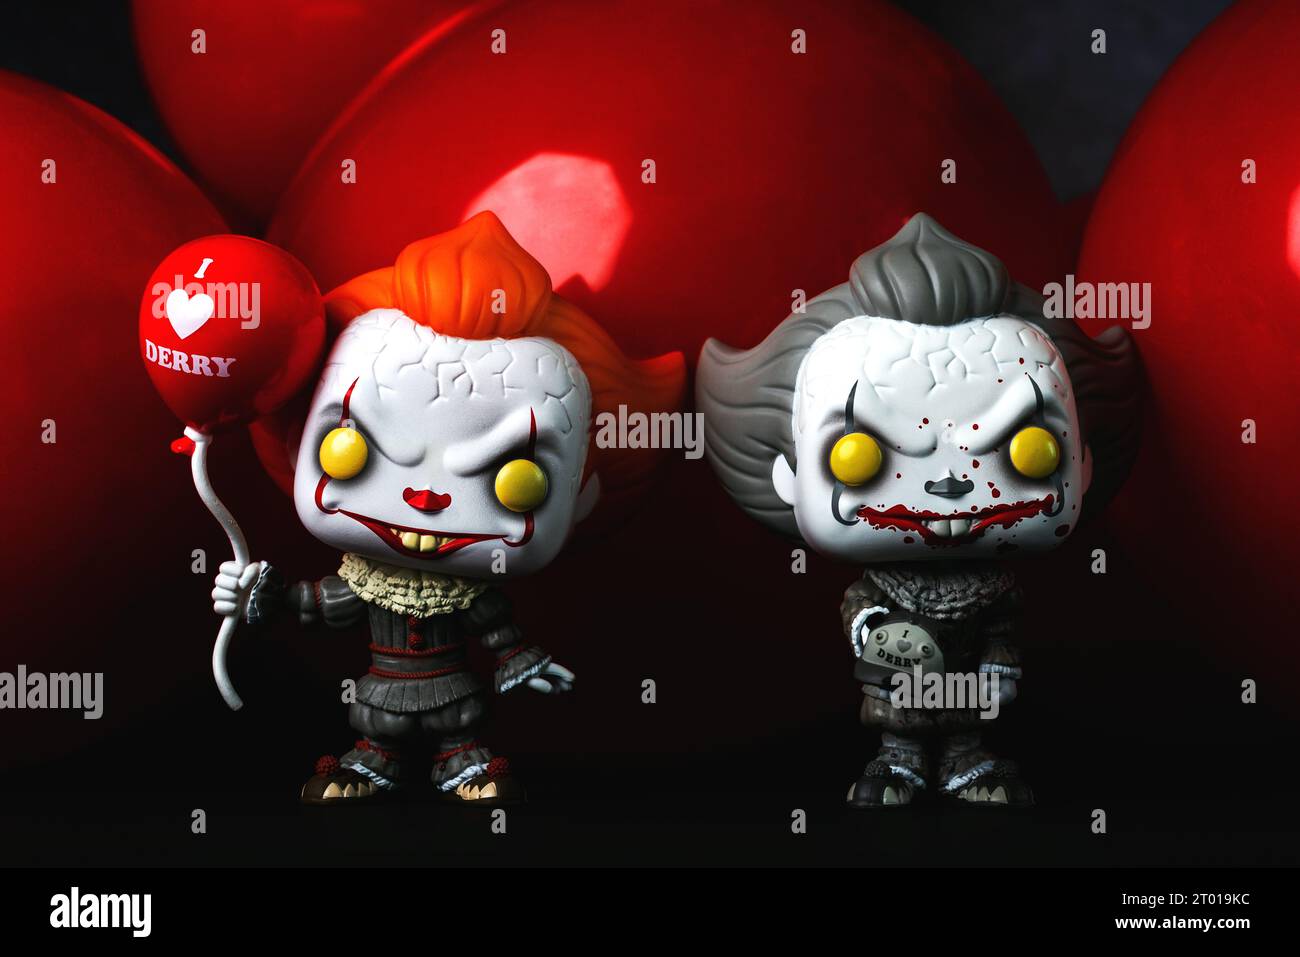 Funko POP vinyl figures of Pennywise with balloons from the movie It. Illustrative editorial of Funko Pop action figure Stock Photo